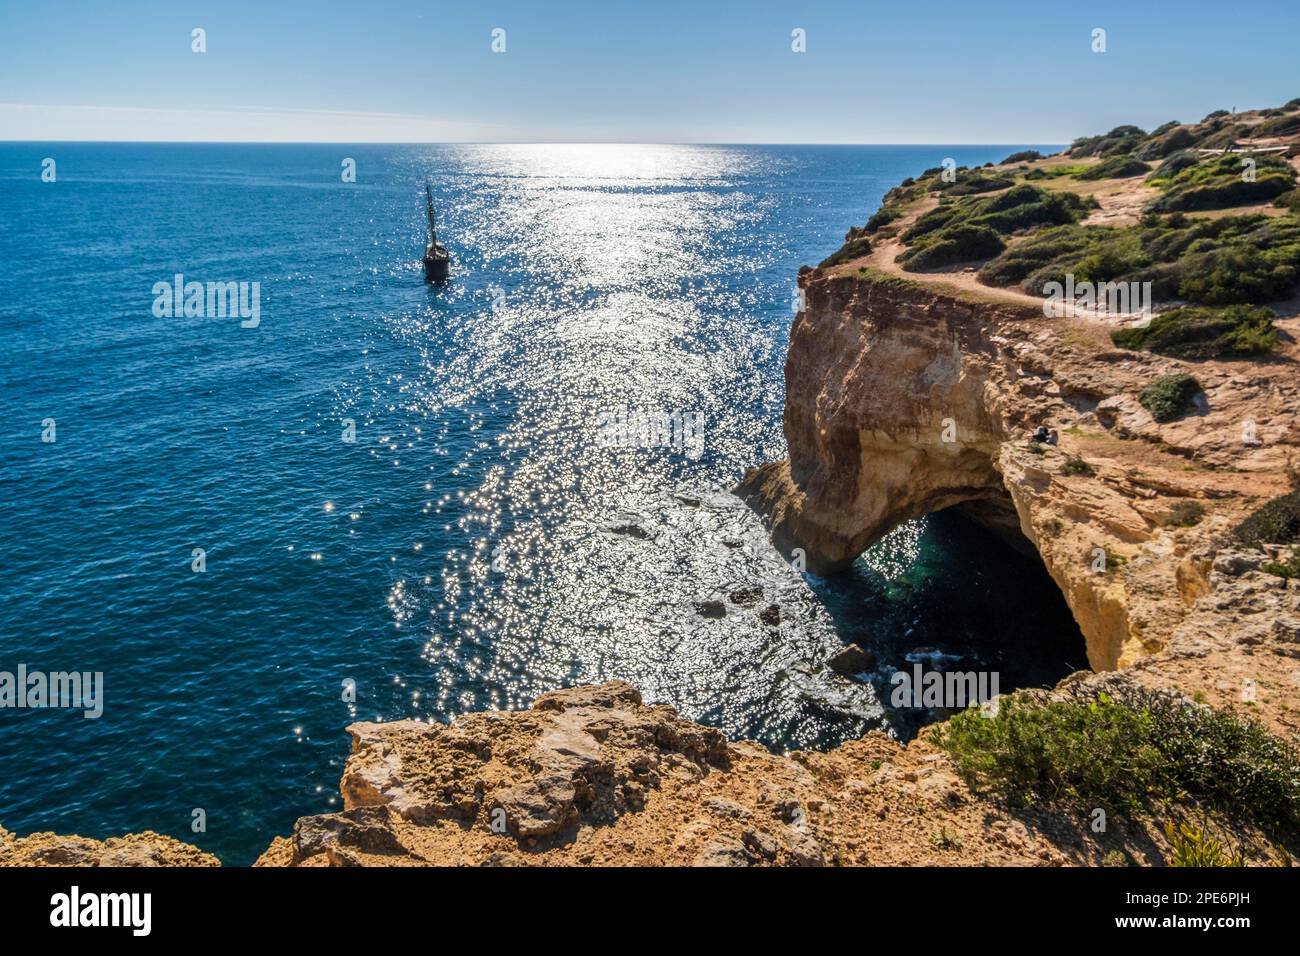 Sailboat on the Atlantic Ocean, cliffs and arch at coast of Algarve, south of Portugal Stock Photo